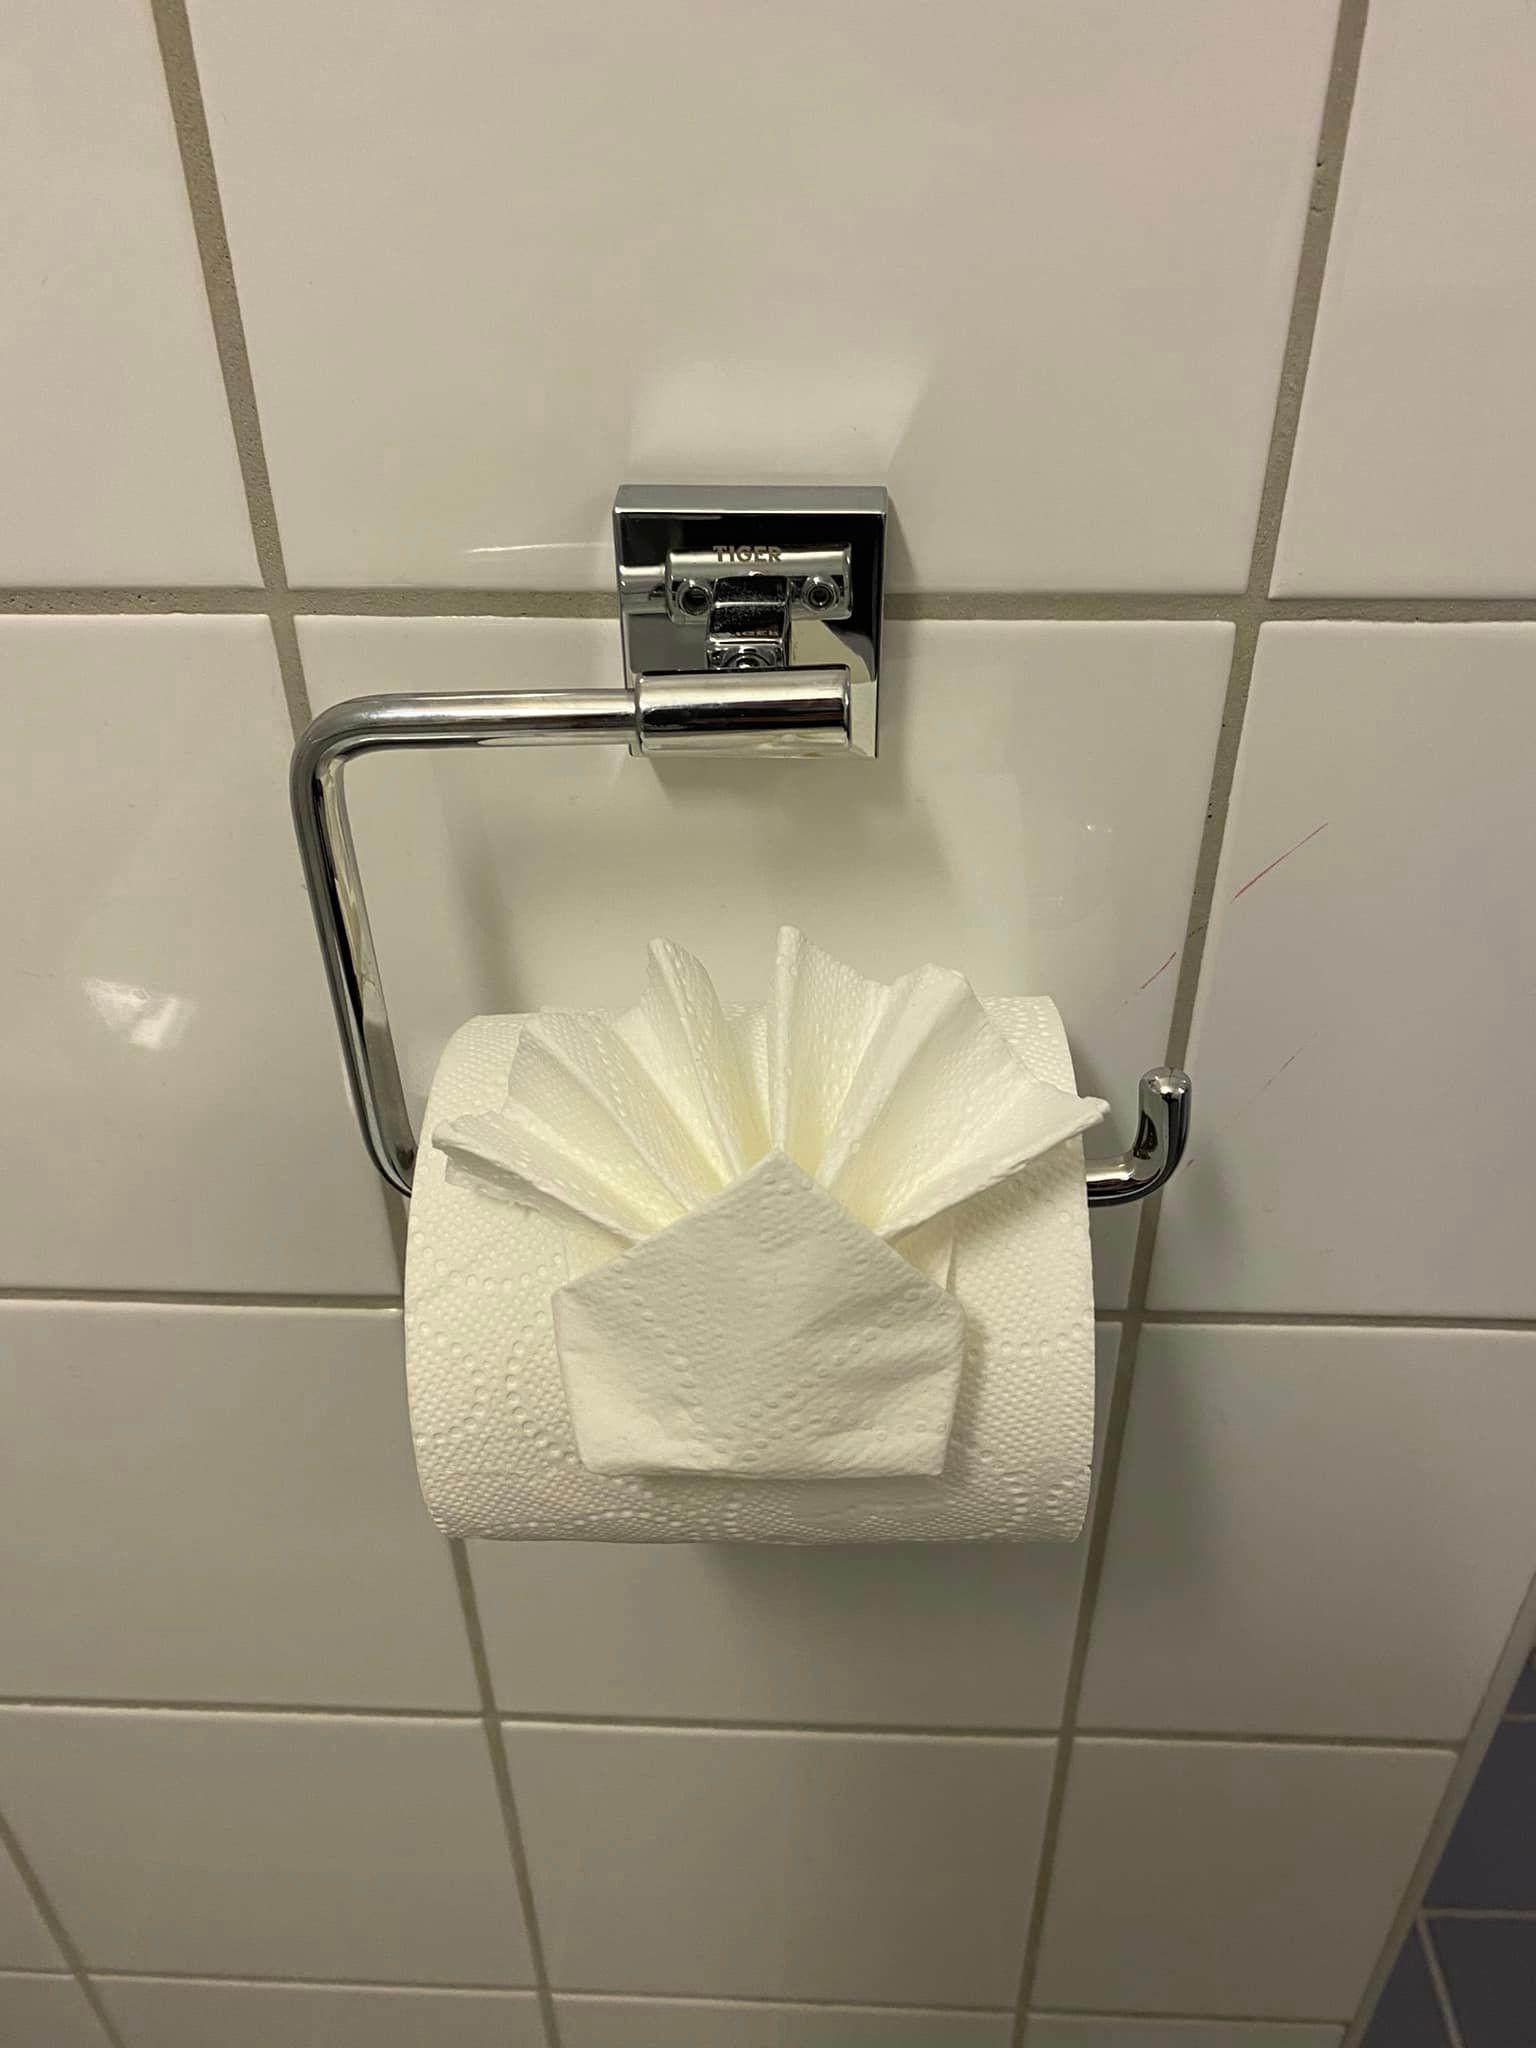 Nicely folded toilet paper.'